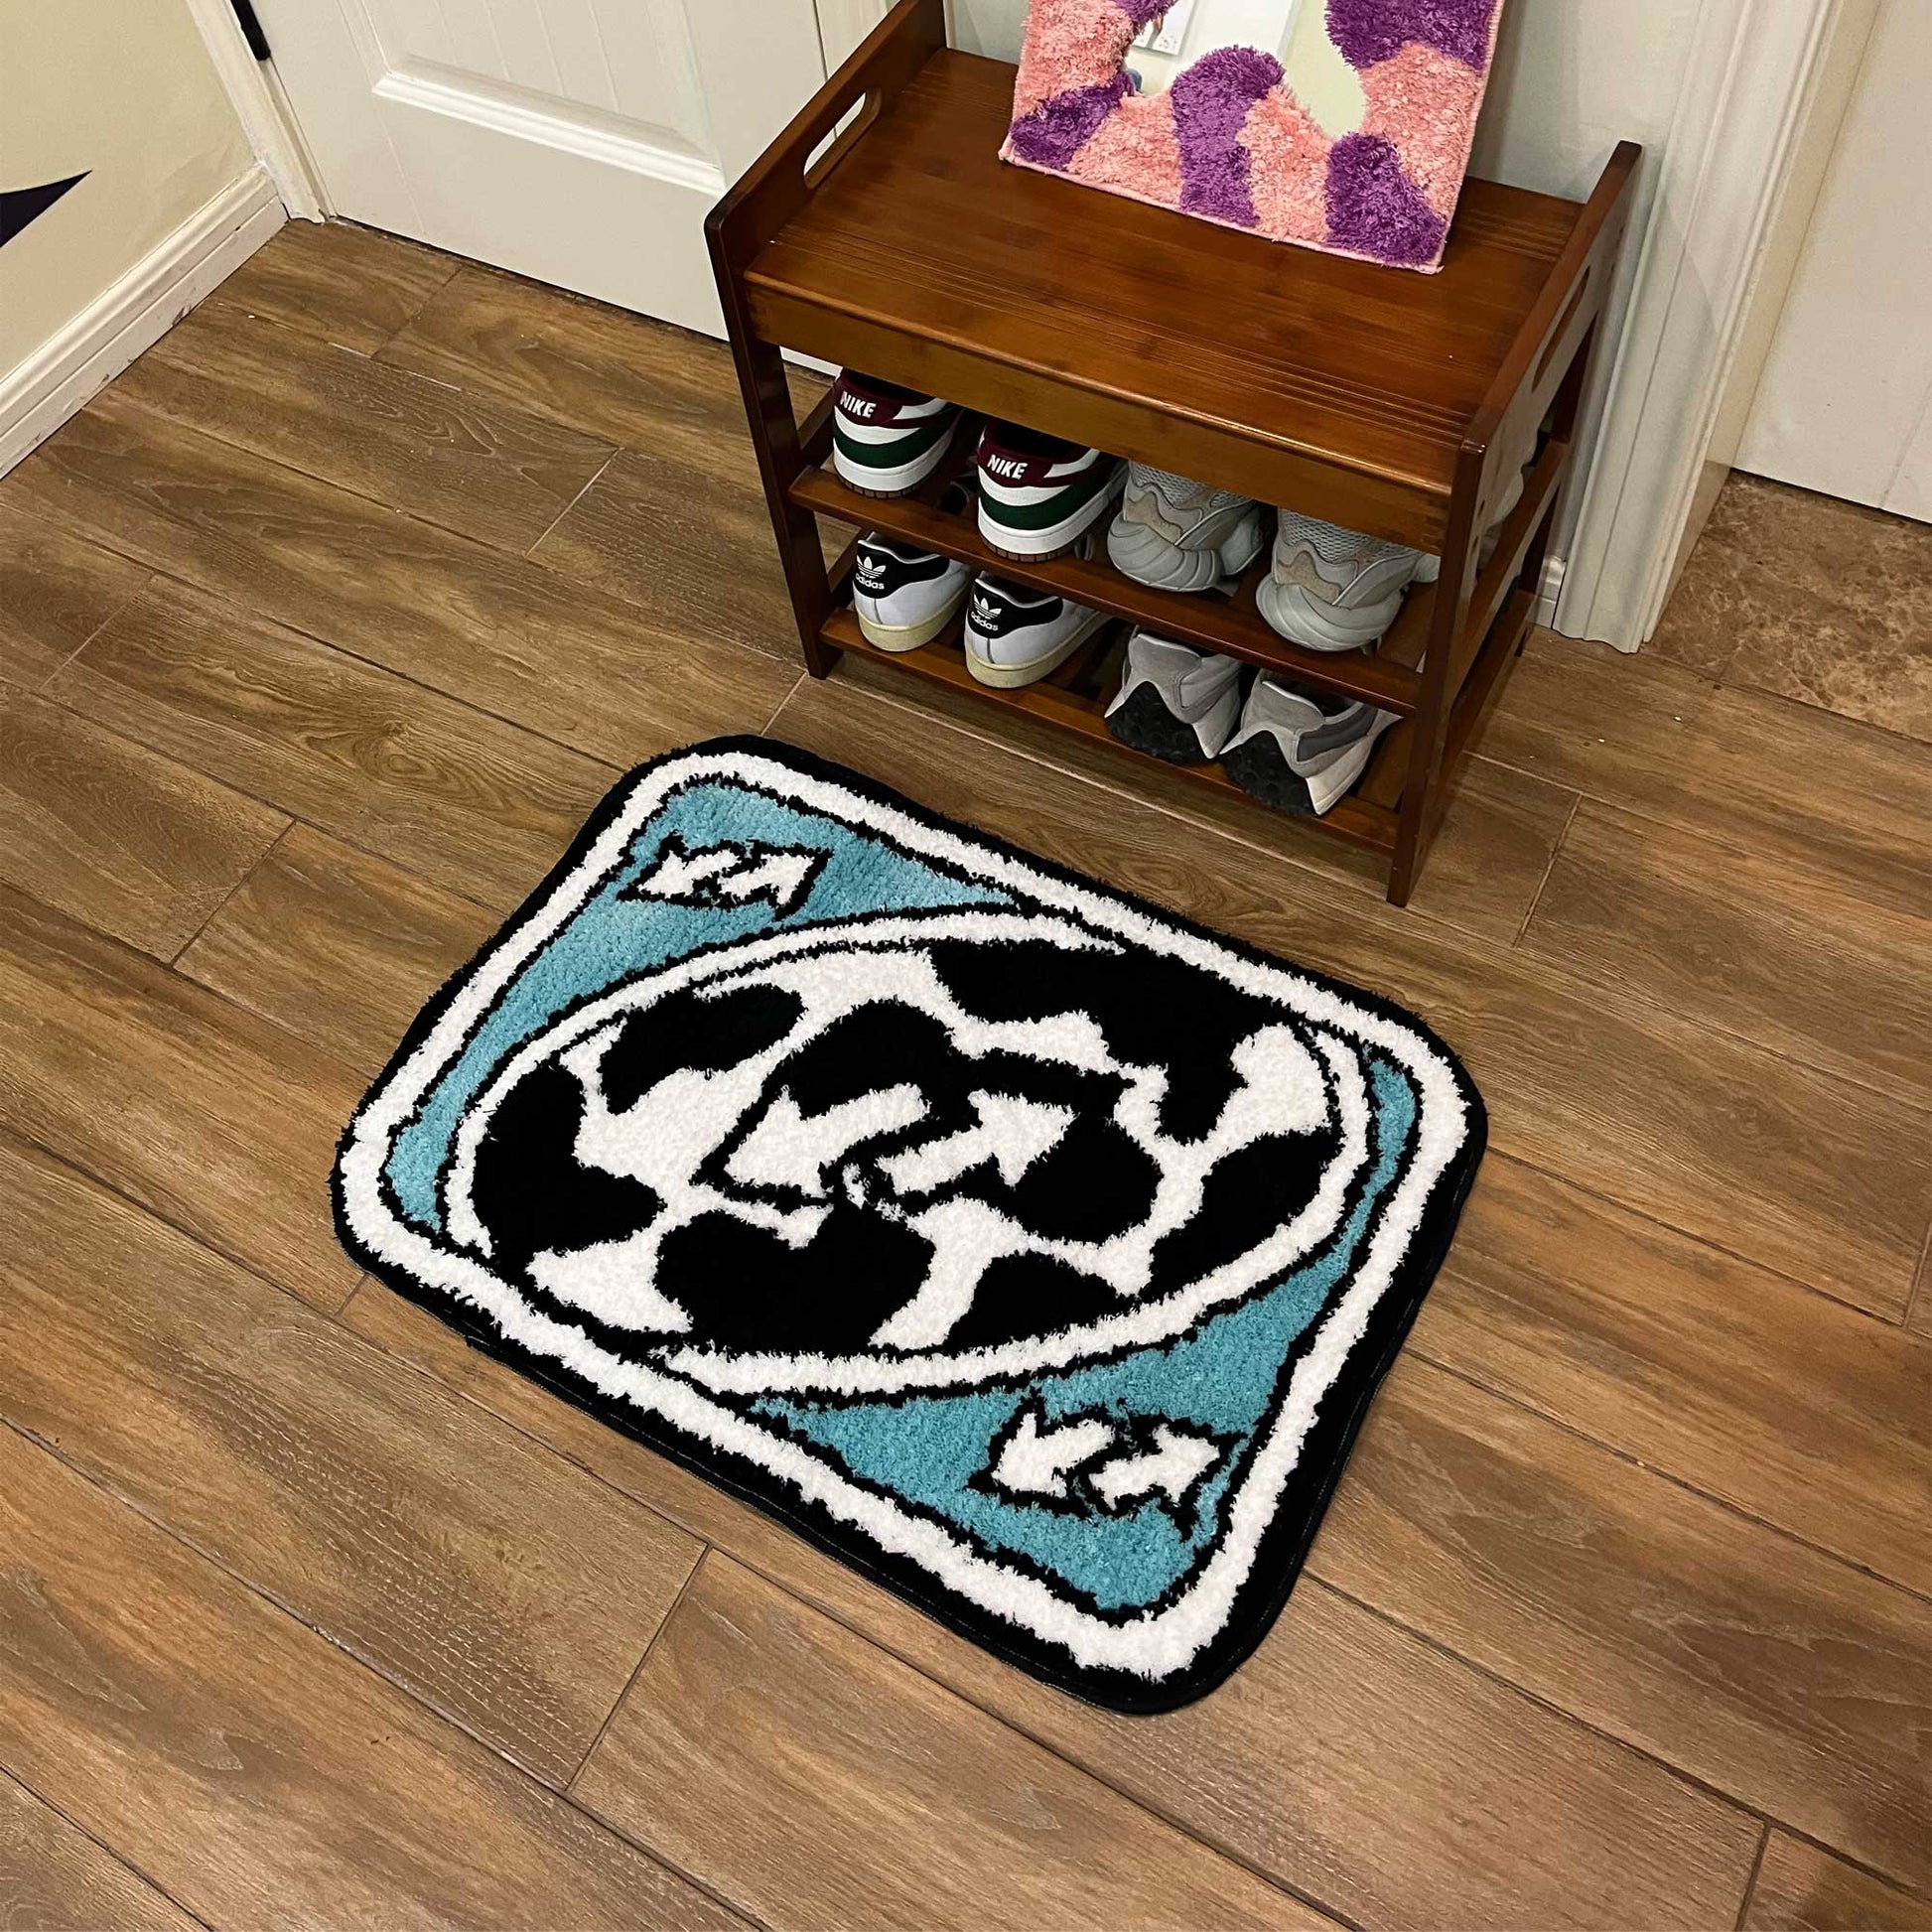 Tufted Rug Blue UNO Reverse Card Rug in front of Shoe Rack